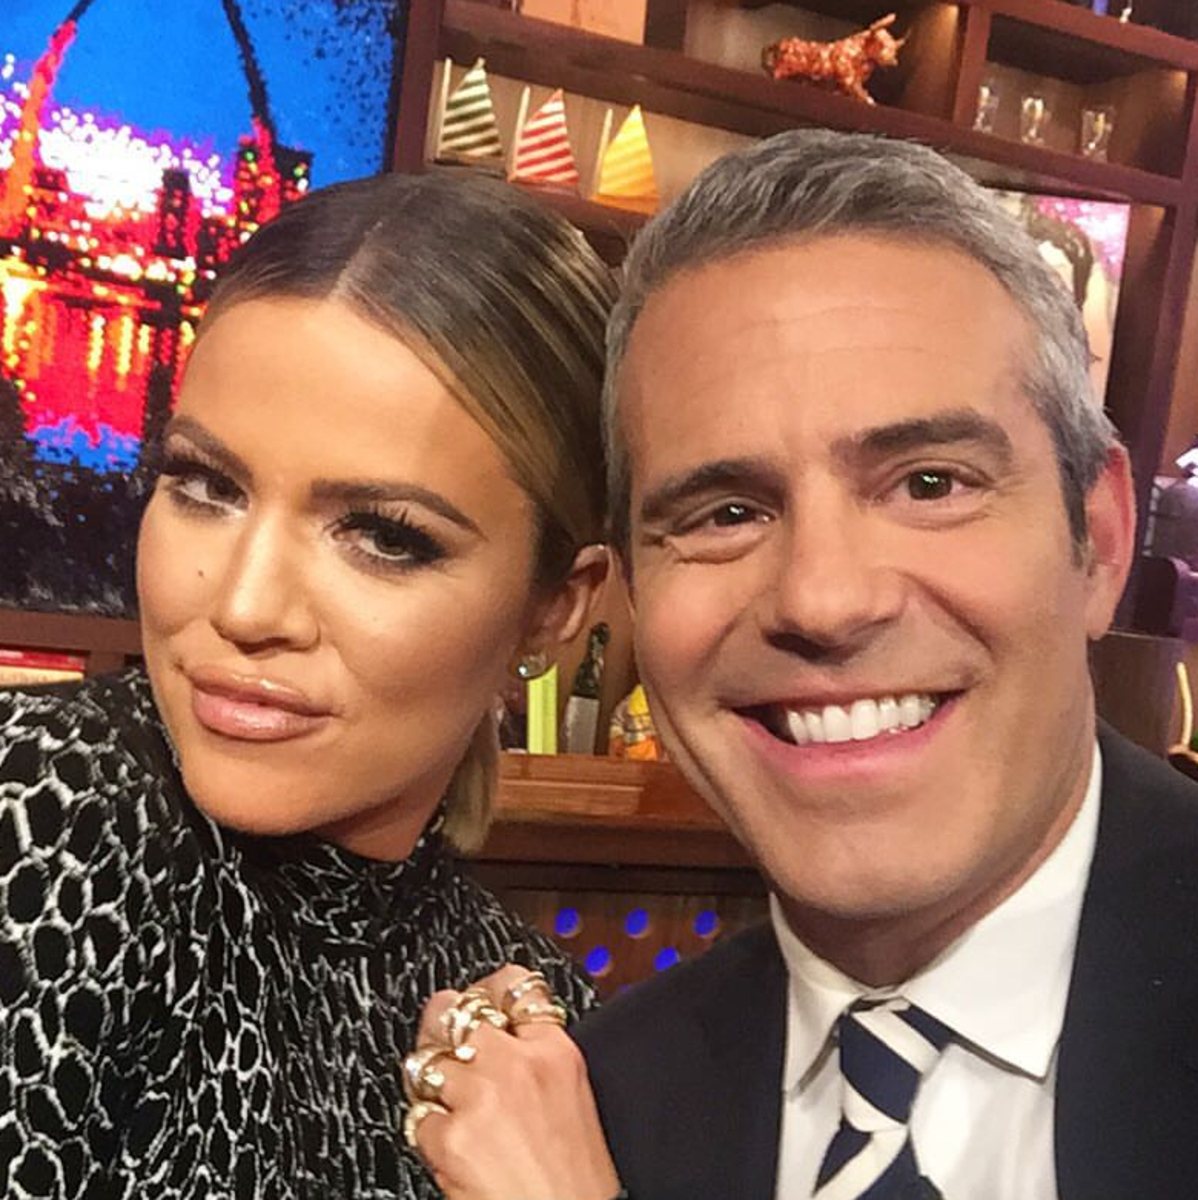 Khloe Kardashian Has Best Response to Andy Cohen’s Son Sneaking Chips